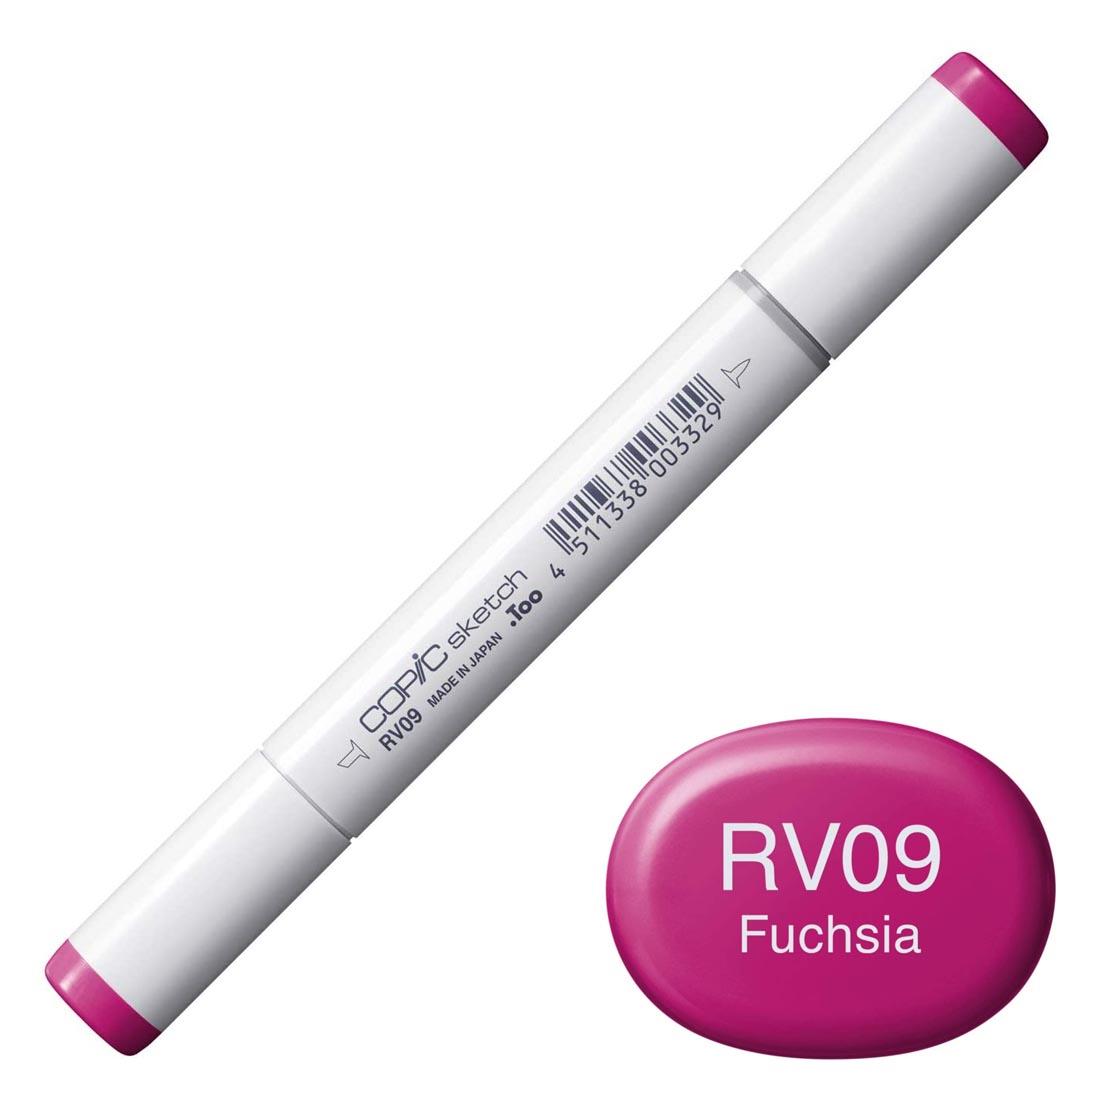 COPIC Sketch Marker with a color swatch and text of RV09 Fuchsia